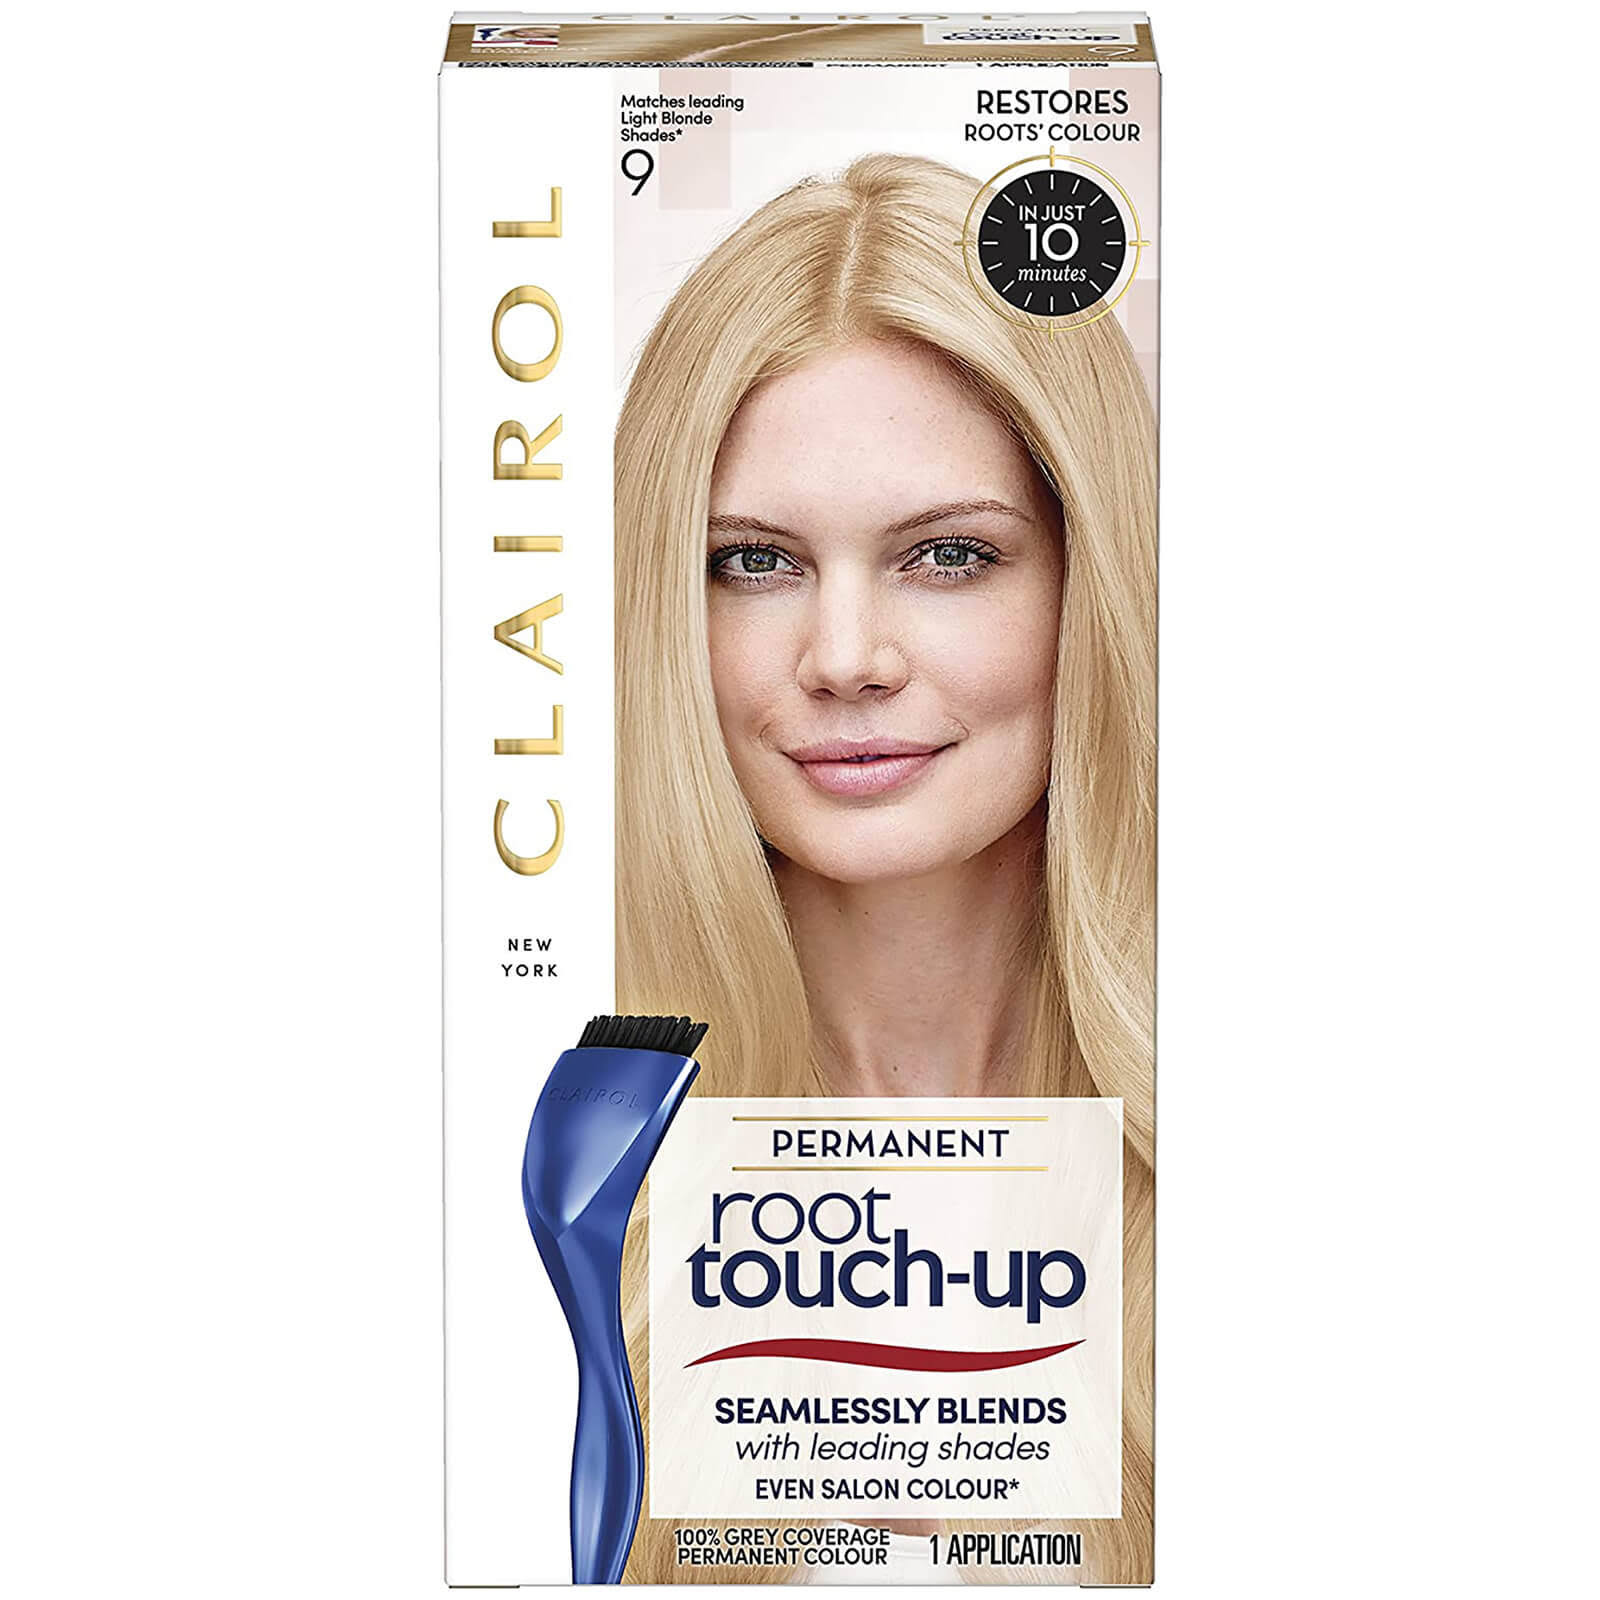 Clairol Root Touch Up Hair Dye - 9 Light Blonde